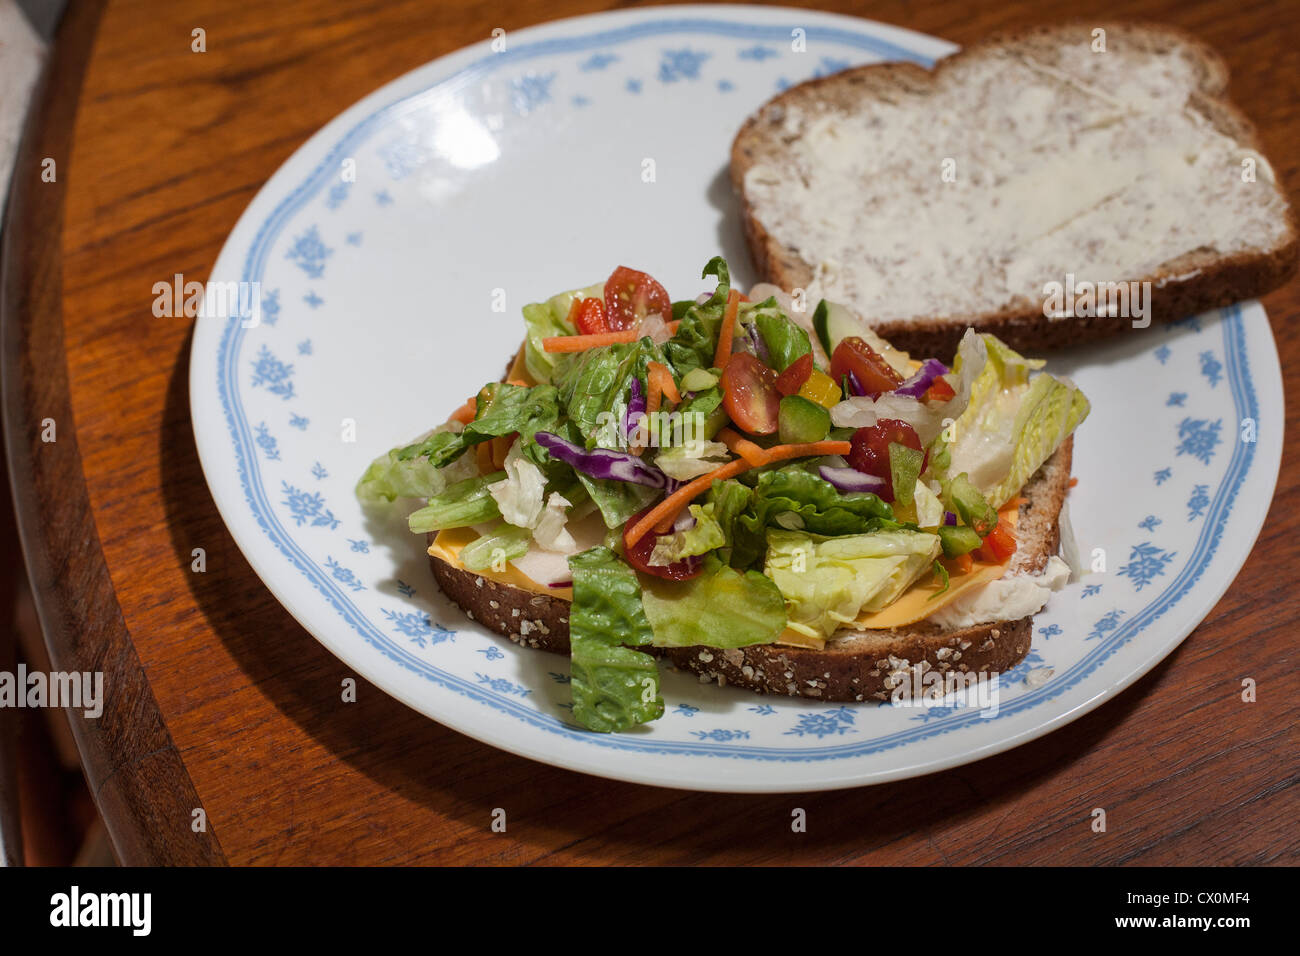 A healthy sandwich made with whole wheat bread, cheese and salad ingredients Stock Photo